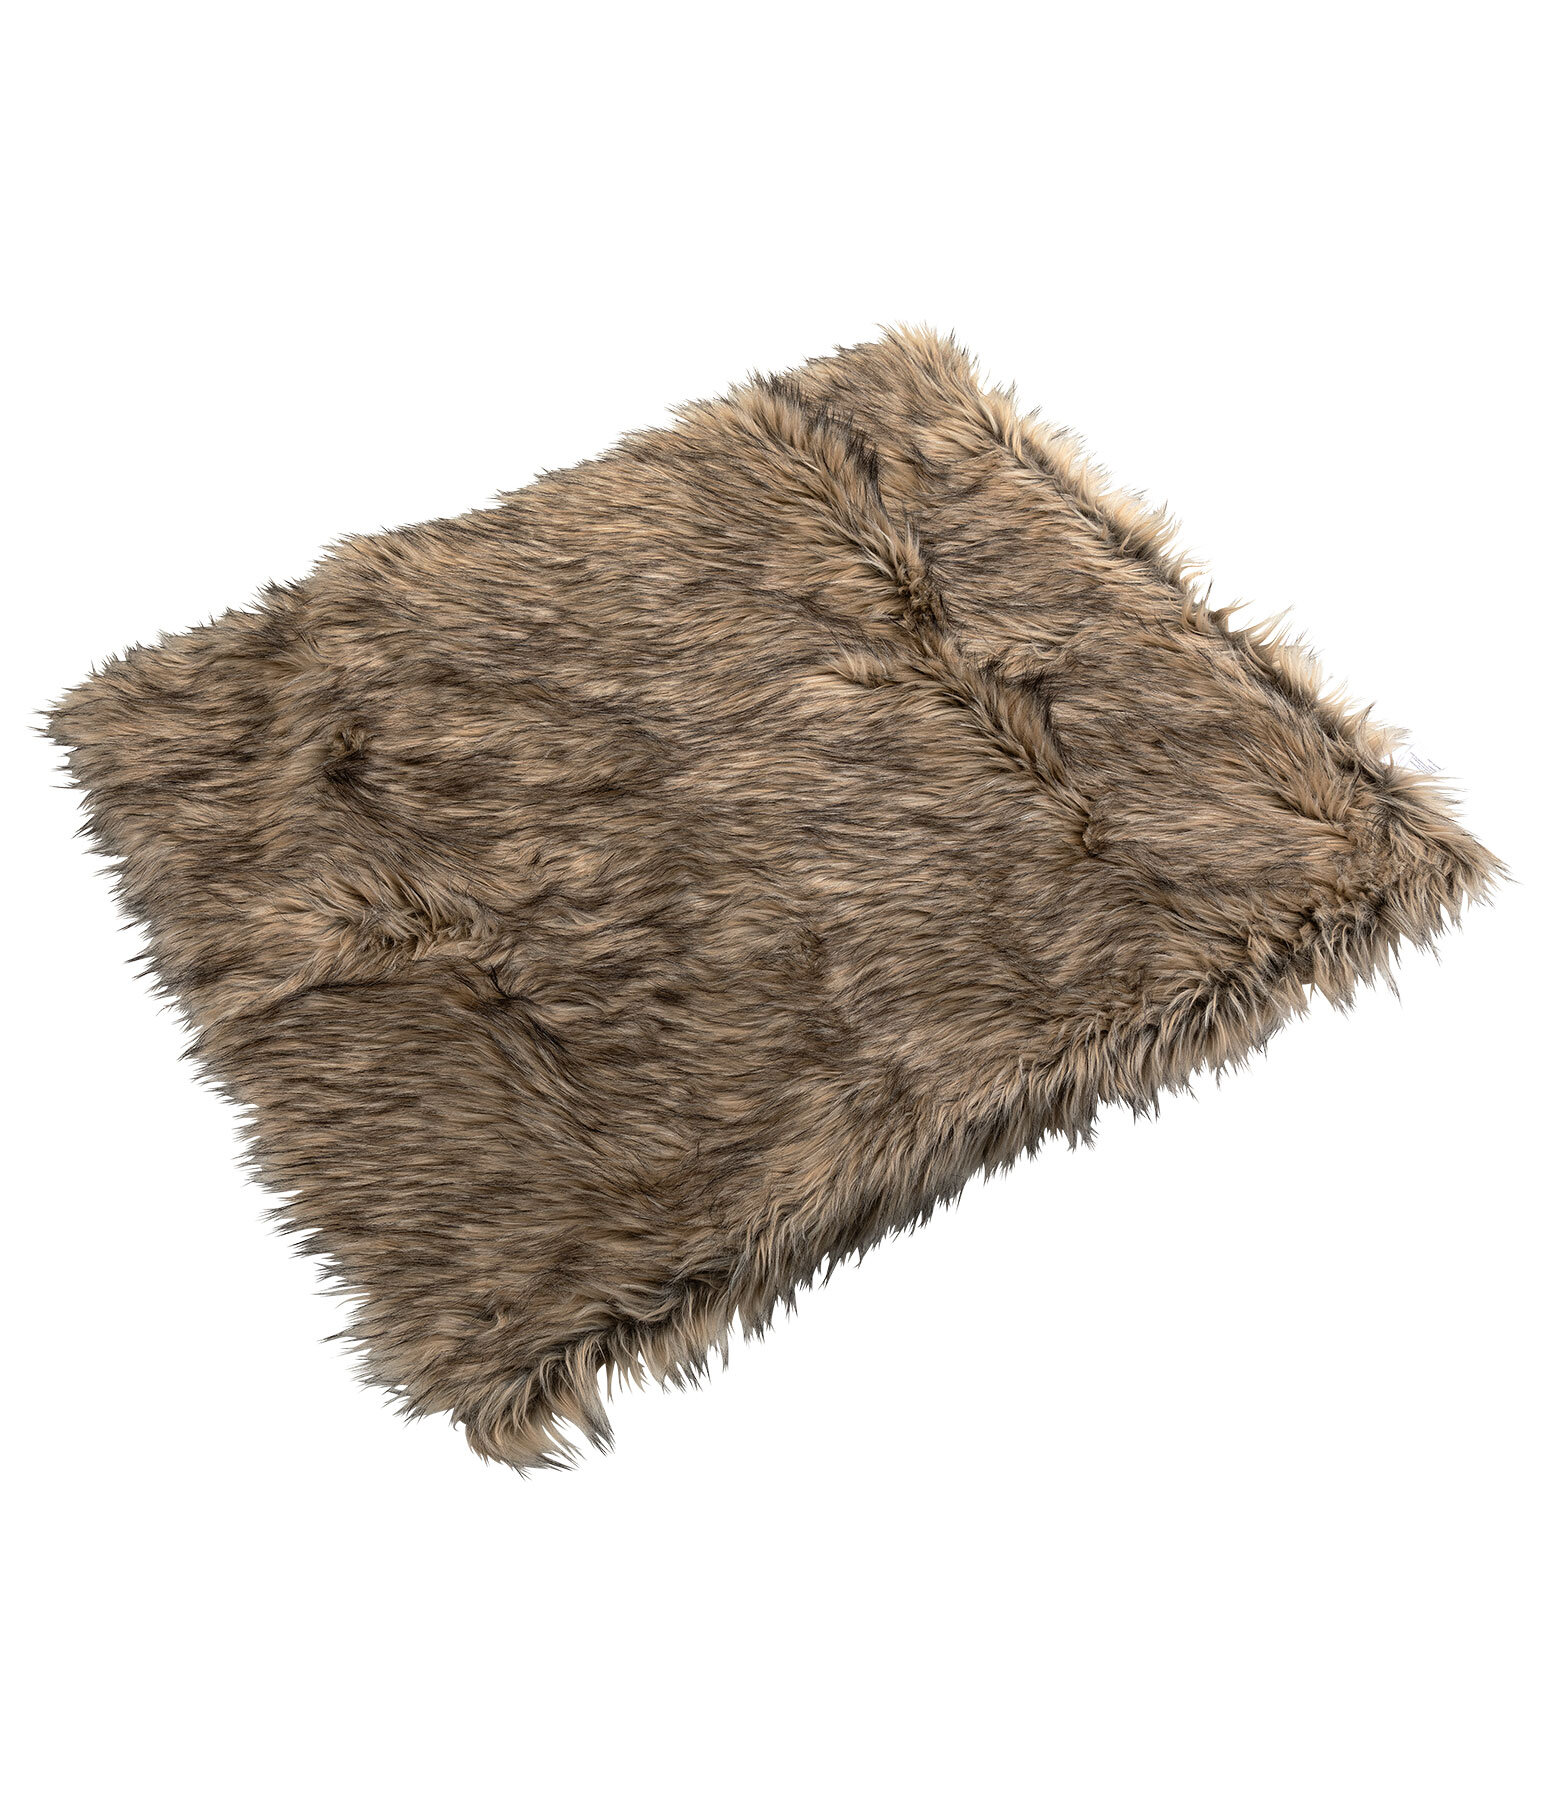 Portable Faux Fur Reclining Dog Blanket California Grizzly